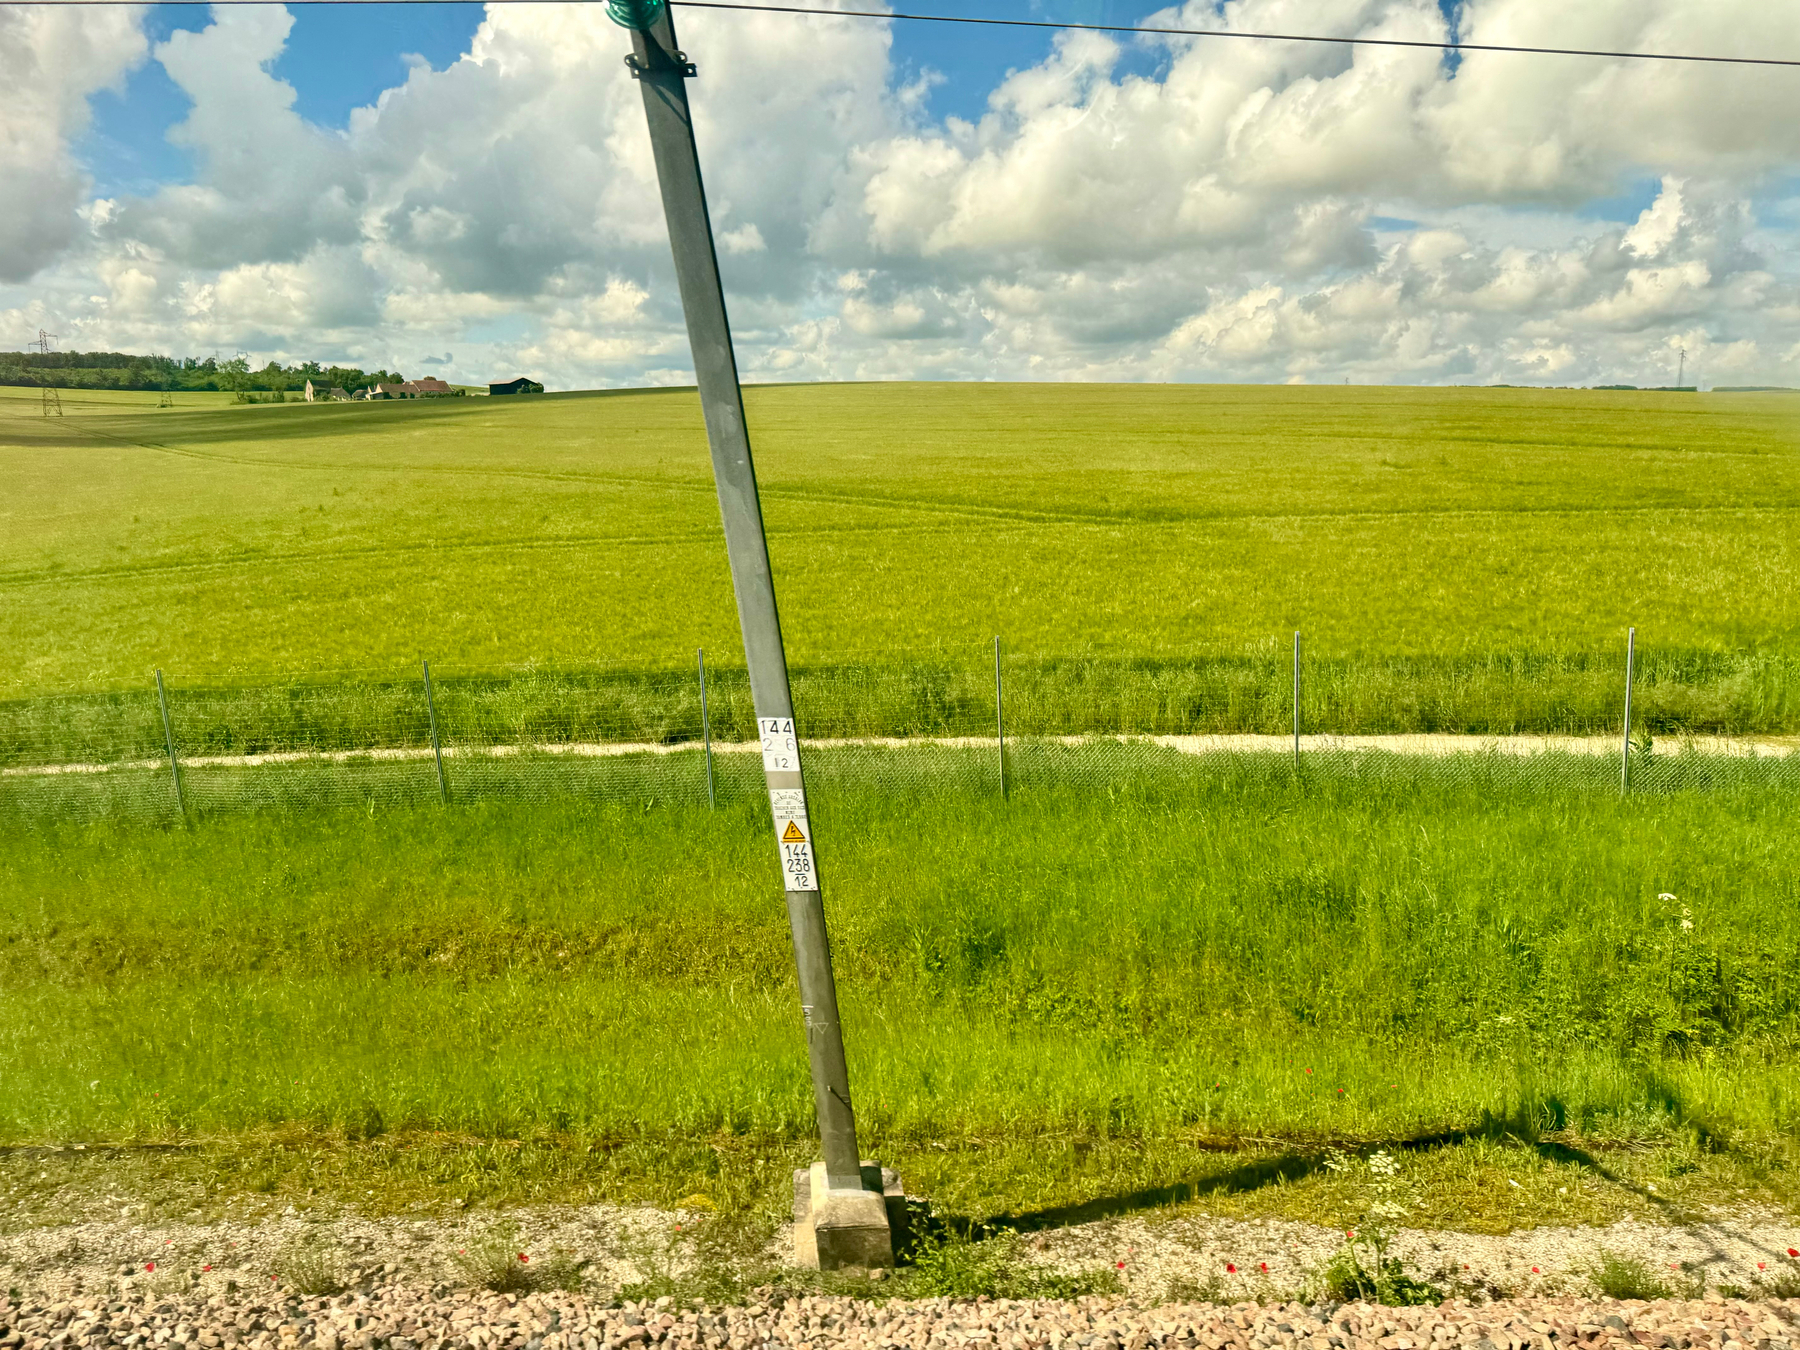 A lush green field under a partly cloudy sky, with a utility pole bearing signs in the foreground, and distant buildings on the horizon.